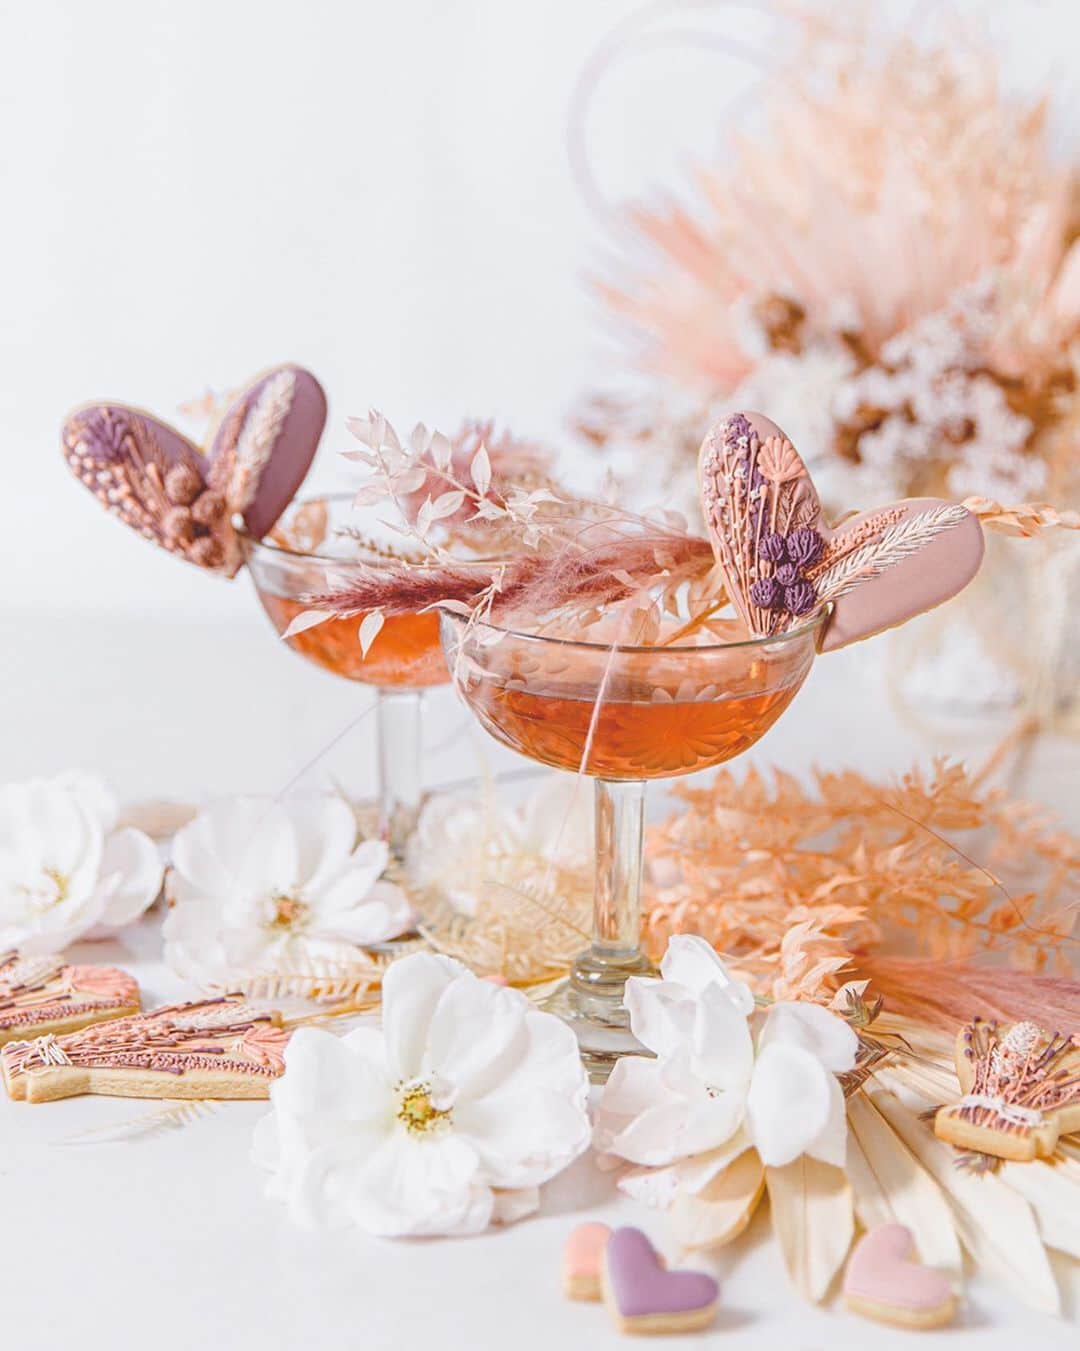 The Little Marketのインスタグラム：「Our margarita glasses have never looked prettier. Pair them with rosé and cookies for a Valentine's Day setup that will make you swoon. Link in bio to shop. 💖 ⠀⠀⠀⠀⠀⠀⠀⠀⠀ Design + Planning: @beijosevents, Photography: @daynastudios, Cookies: @arloscookies, Rosé: @onehope, Florals: @barefootfloral」